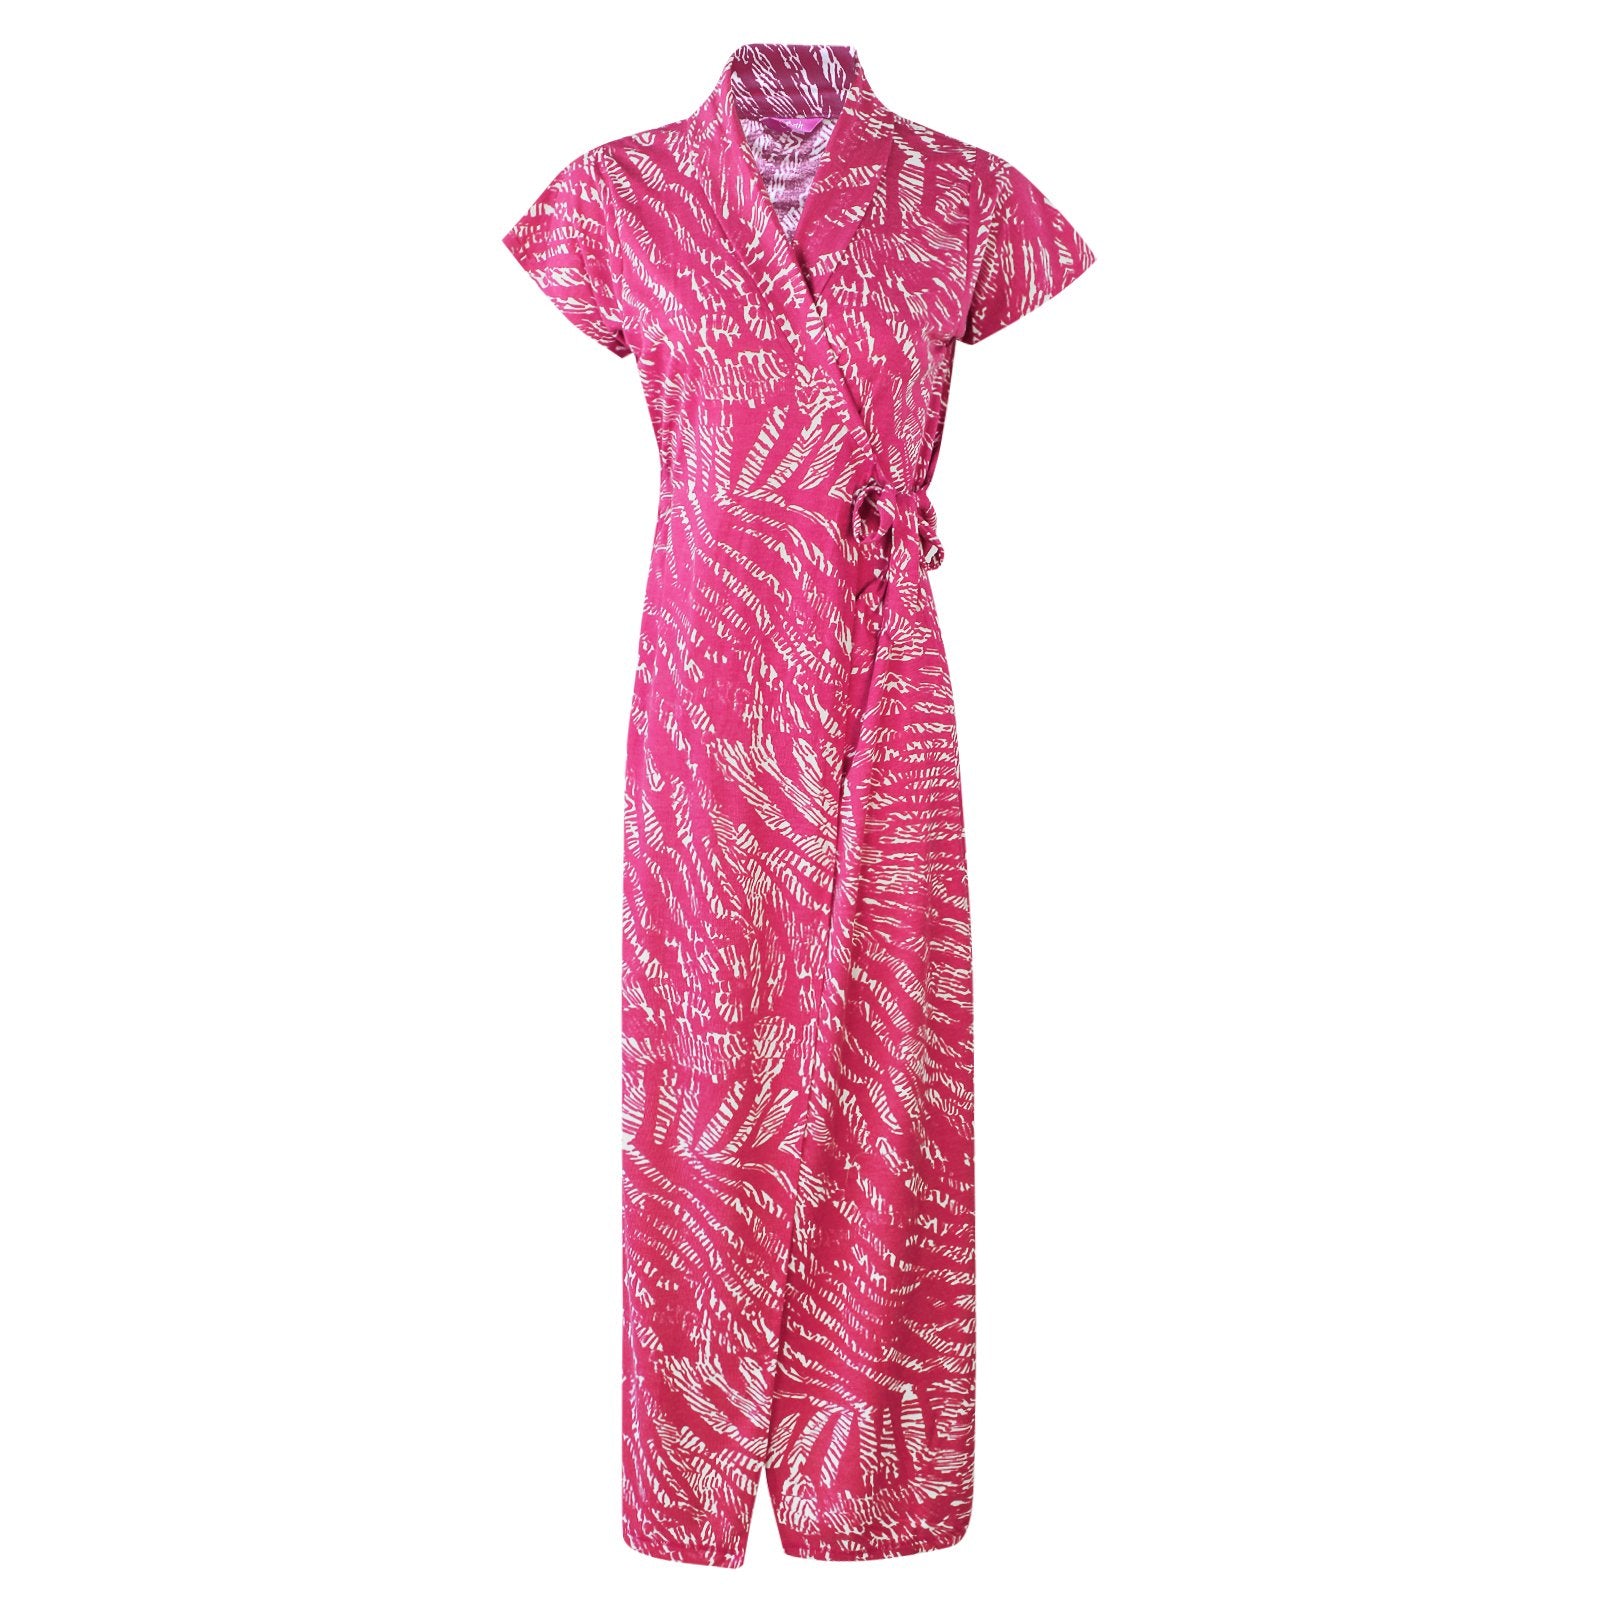 Rose Pink 1 / One Size Animal Print Cotton Robe / Wrap Gown The Orange Tags